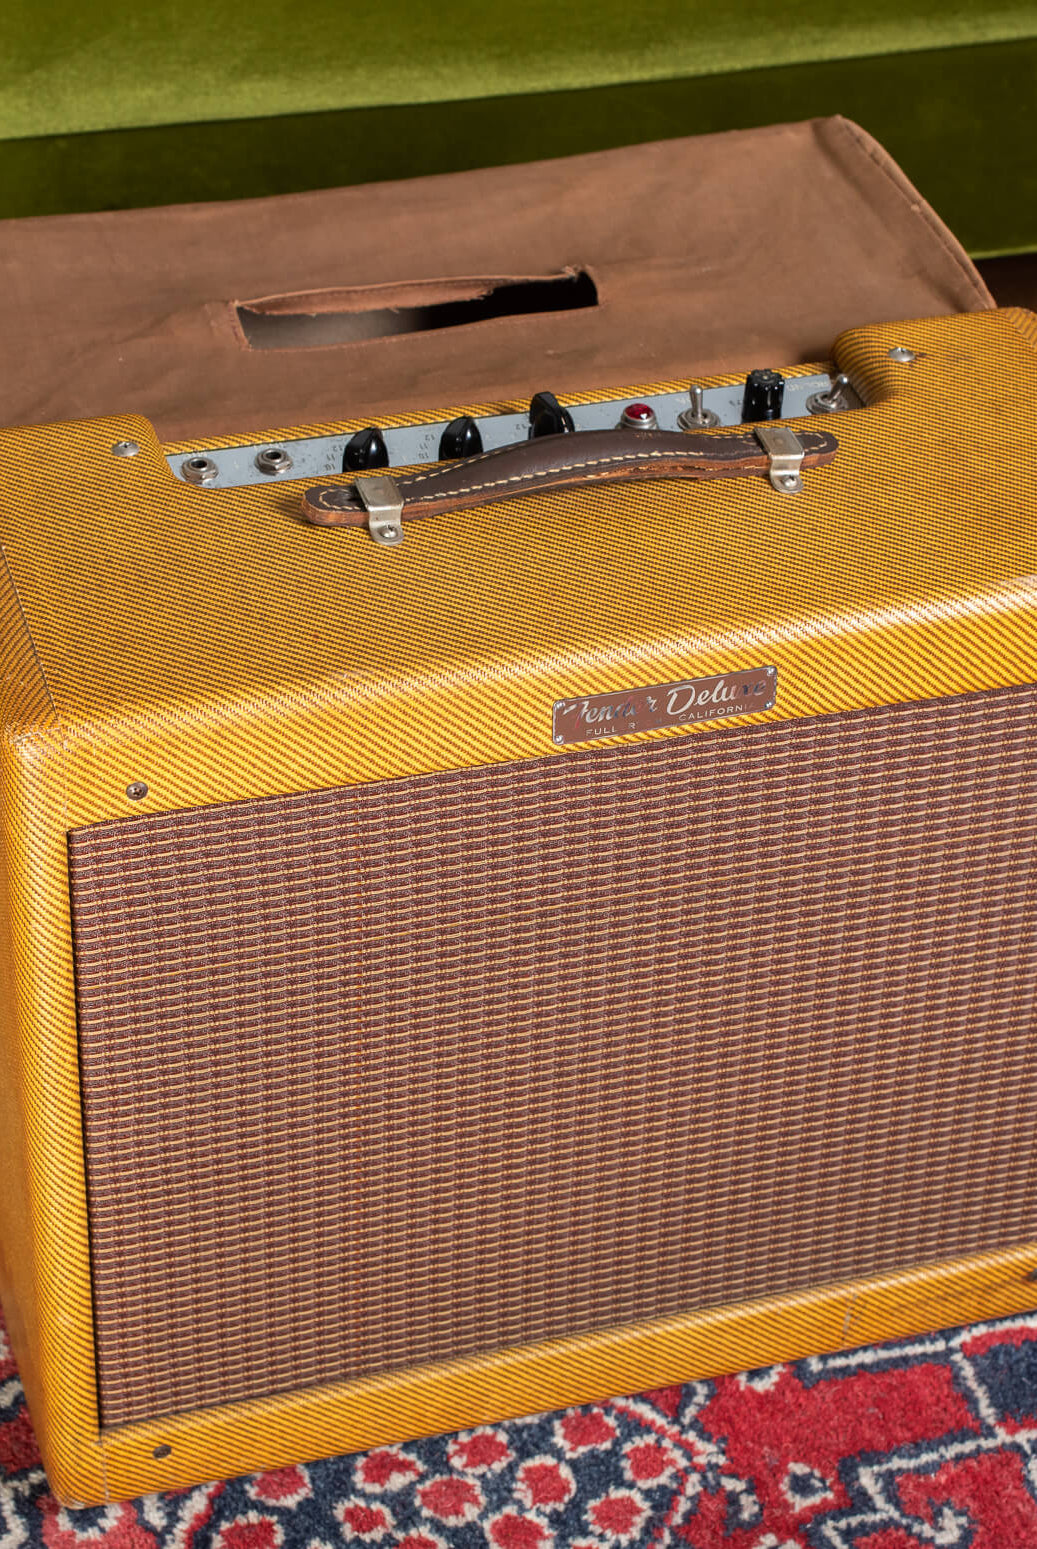 Fender Deluxe Amp 1959 tweed dating and values